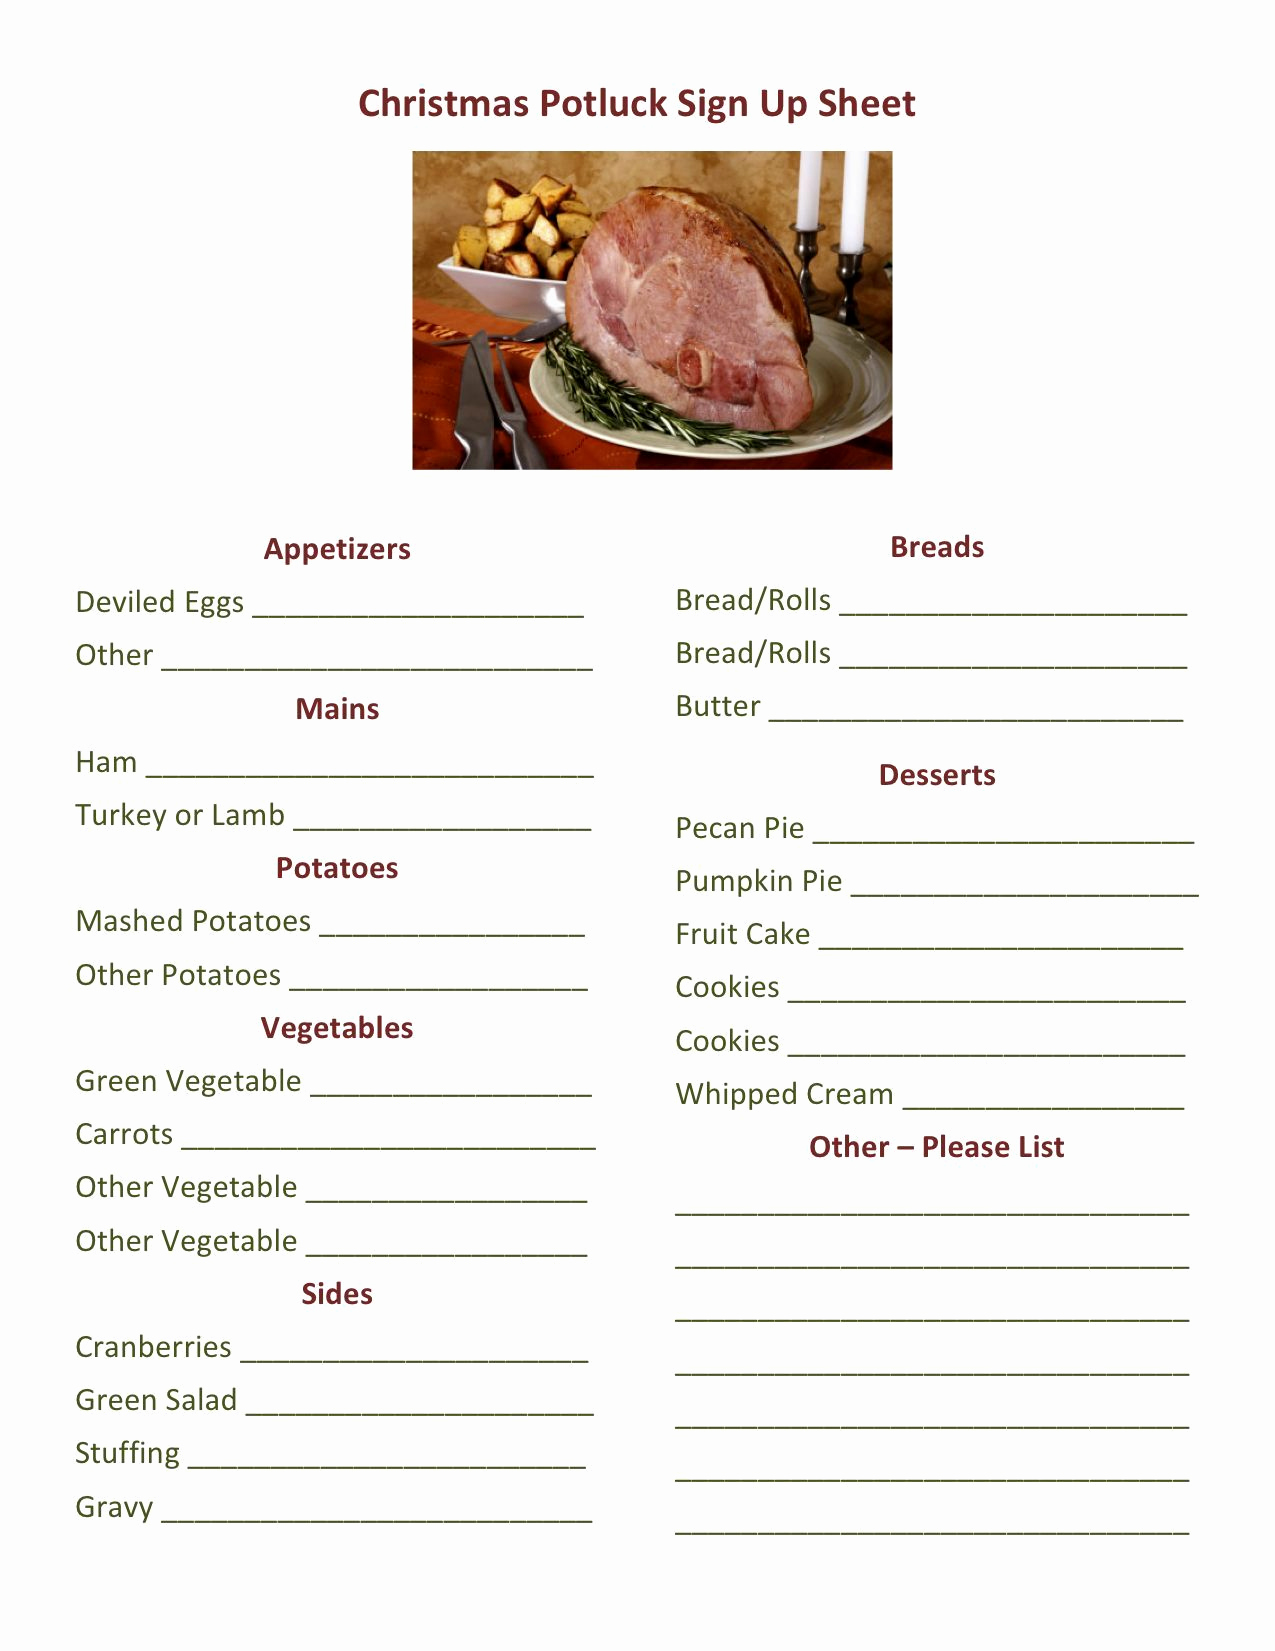 Food Sign Up Sheet Unique Free Sign Up Sheet Christmas Buffet Finger Food